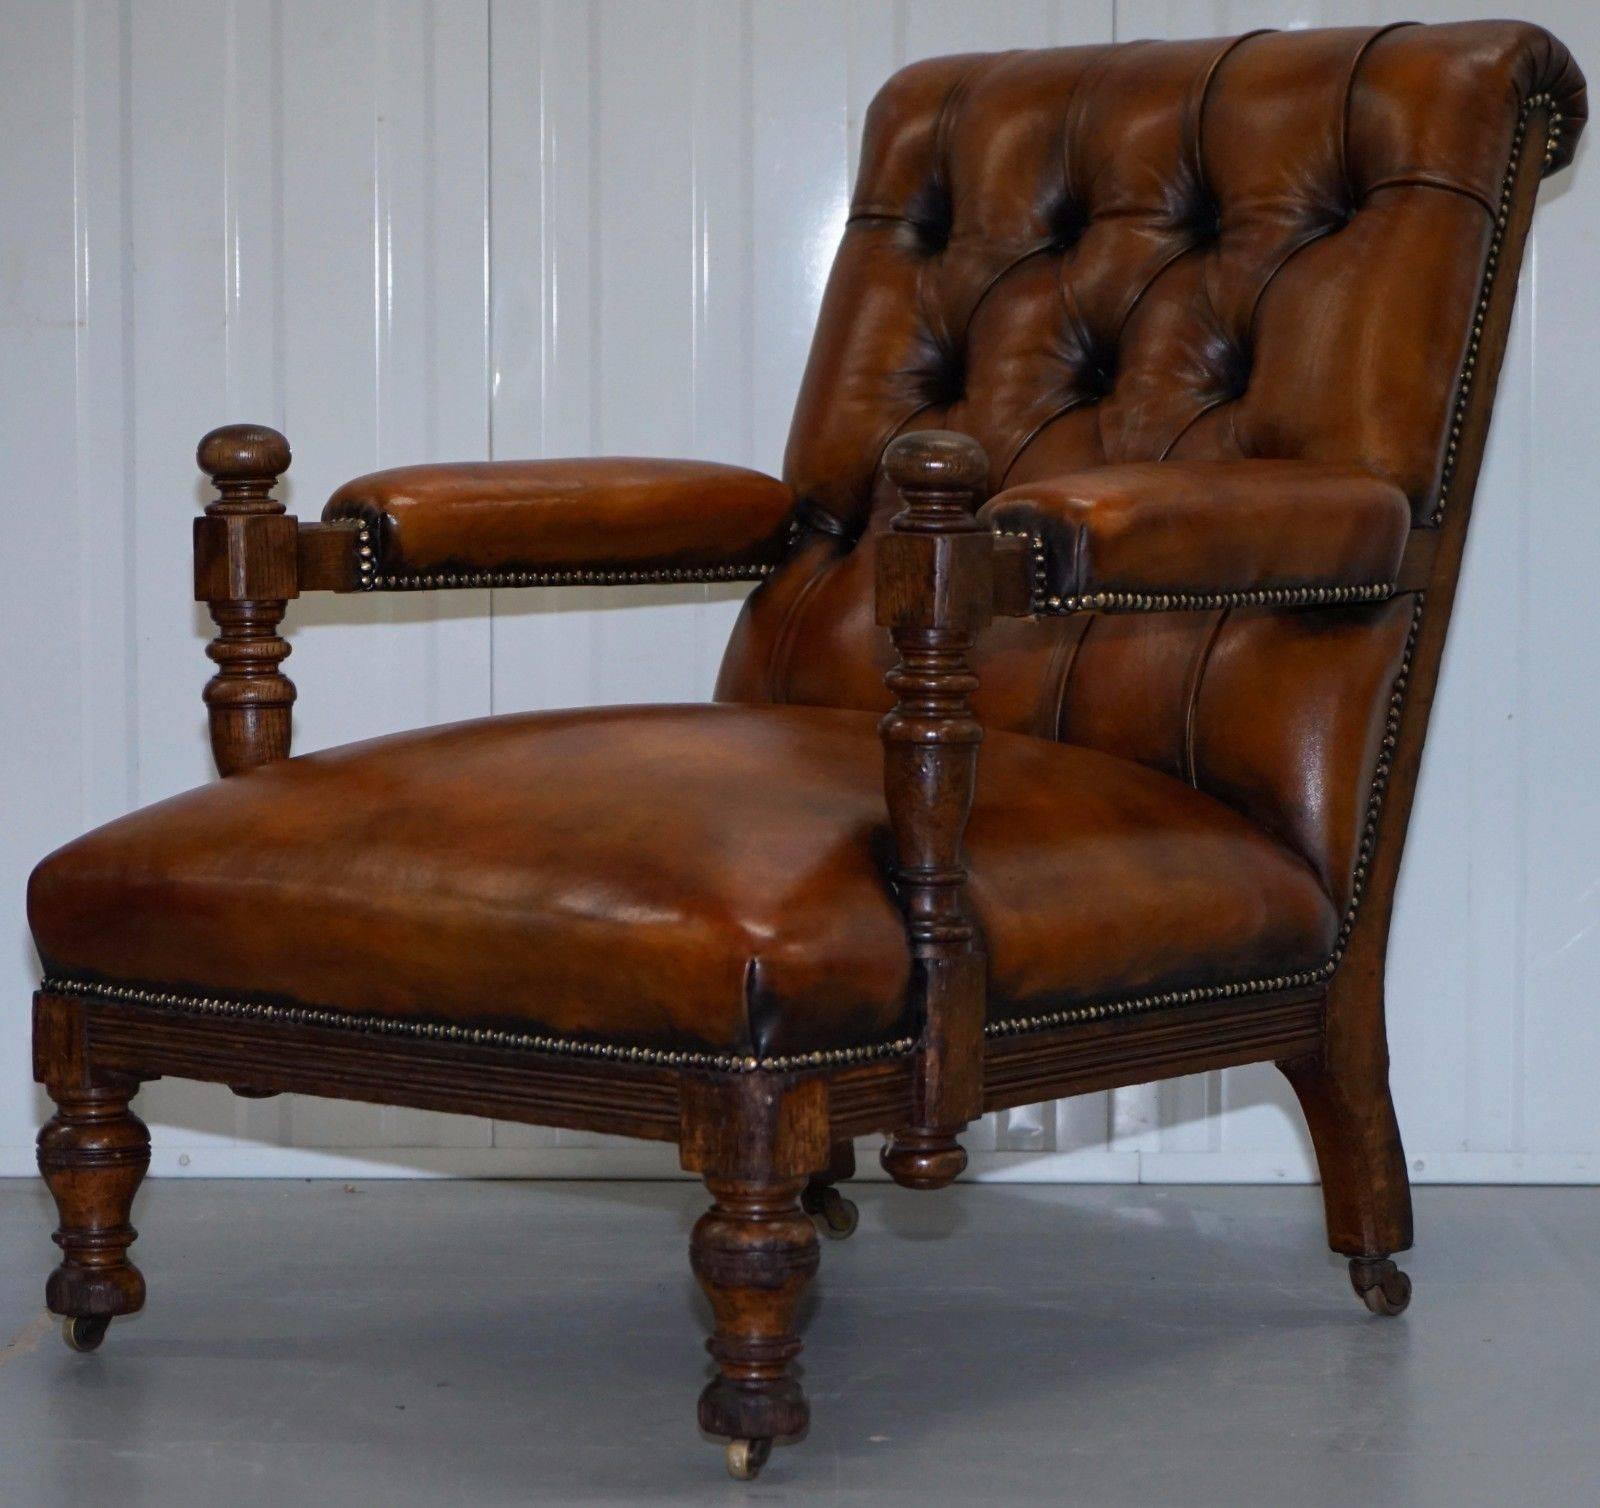 We are delighted to offer for auction this original fully restored Gillows of Lancaster library slipper armchair, stamped on the inside of the back leg

Please note the delivery fee is just a guide, for an accurate quote please send me your